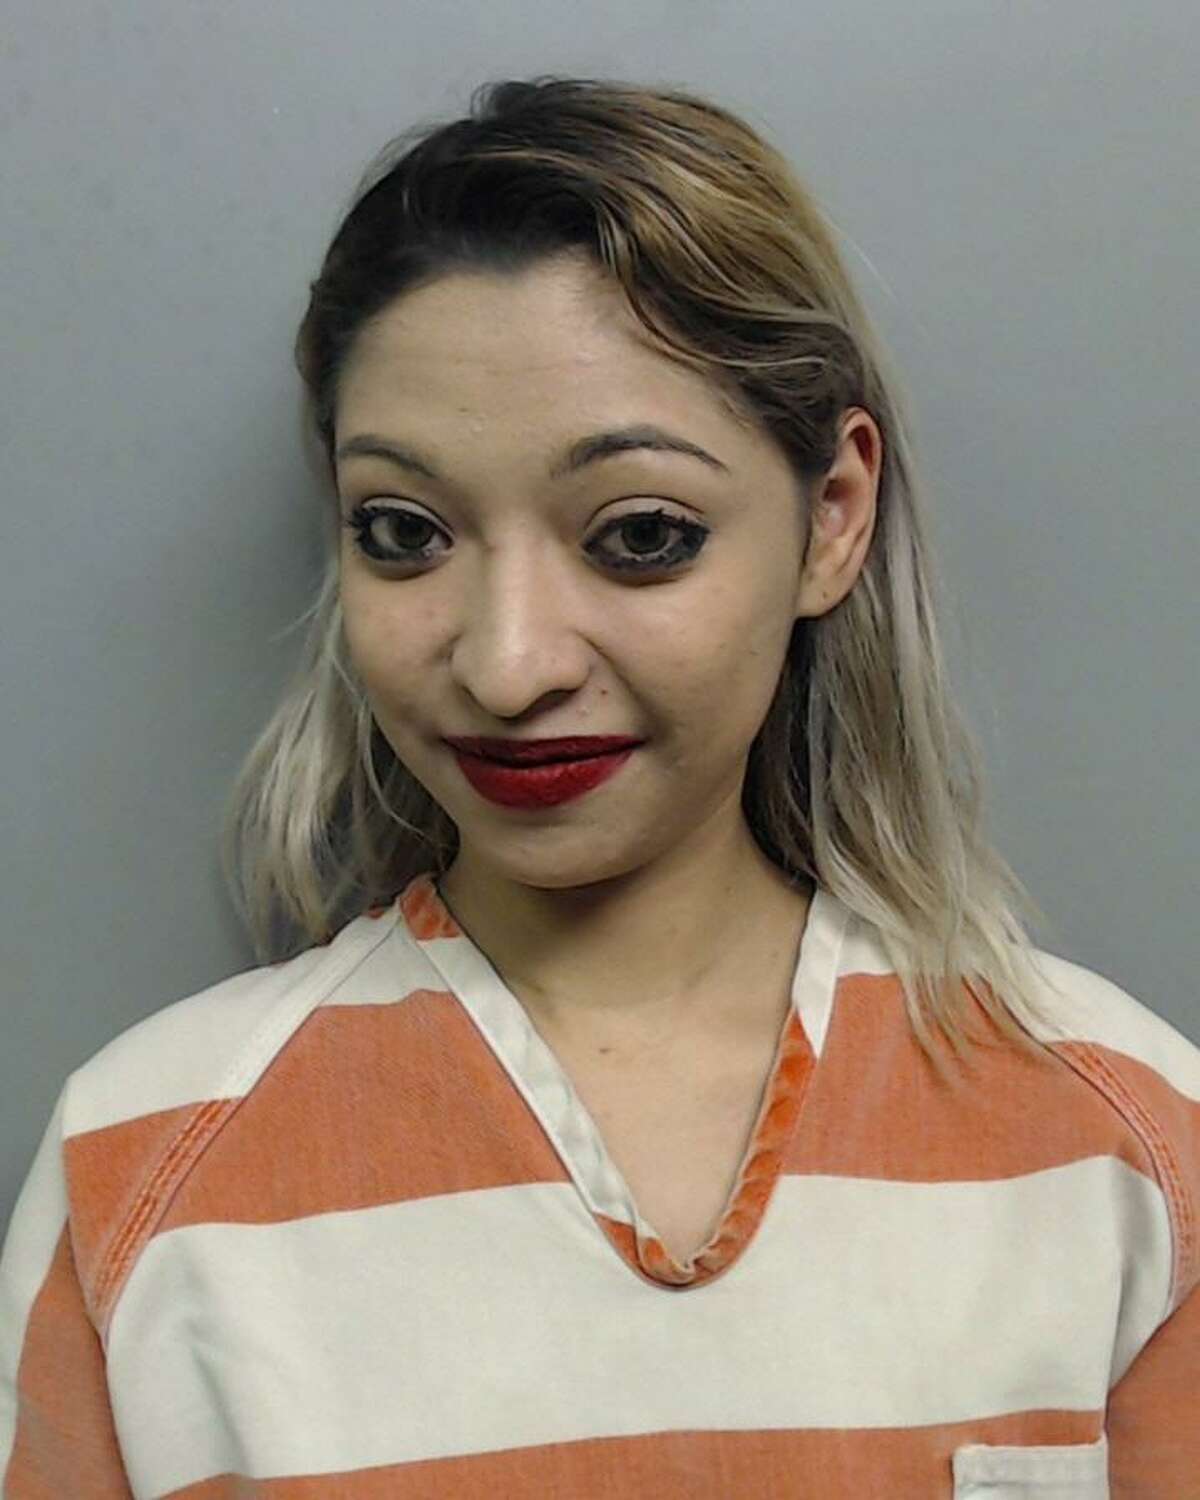 Sarah Jo Barrera, 24, was charged with aggravated assault with a deadly weapon.